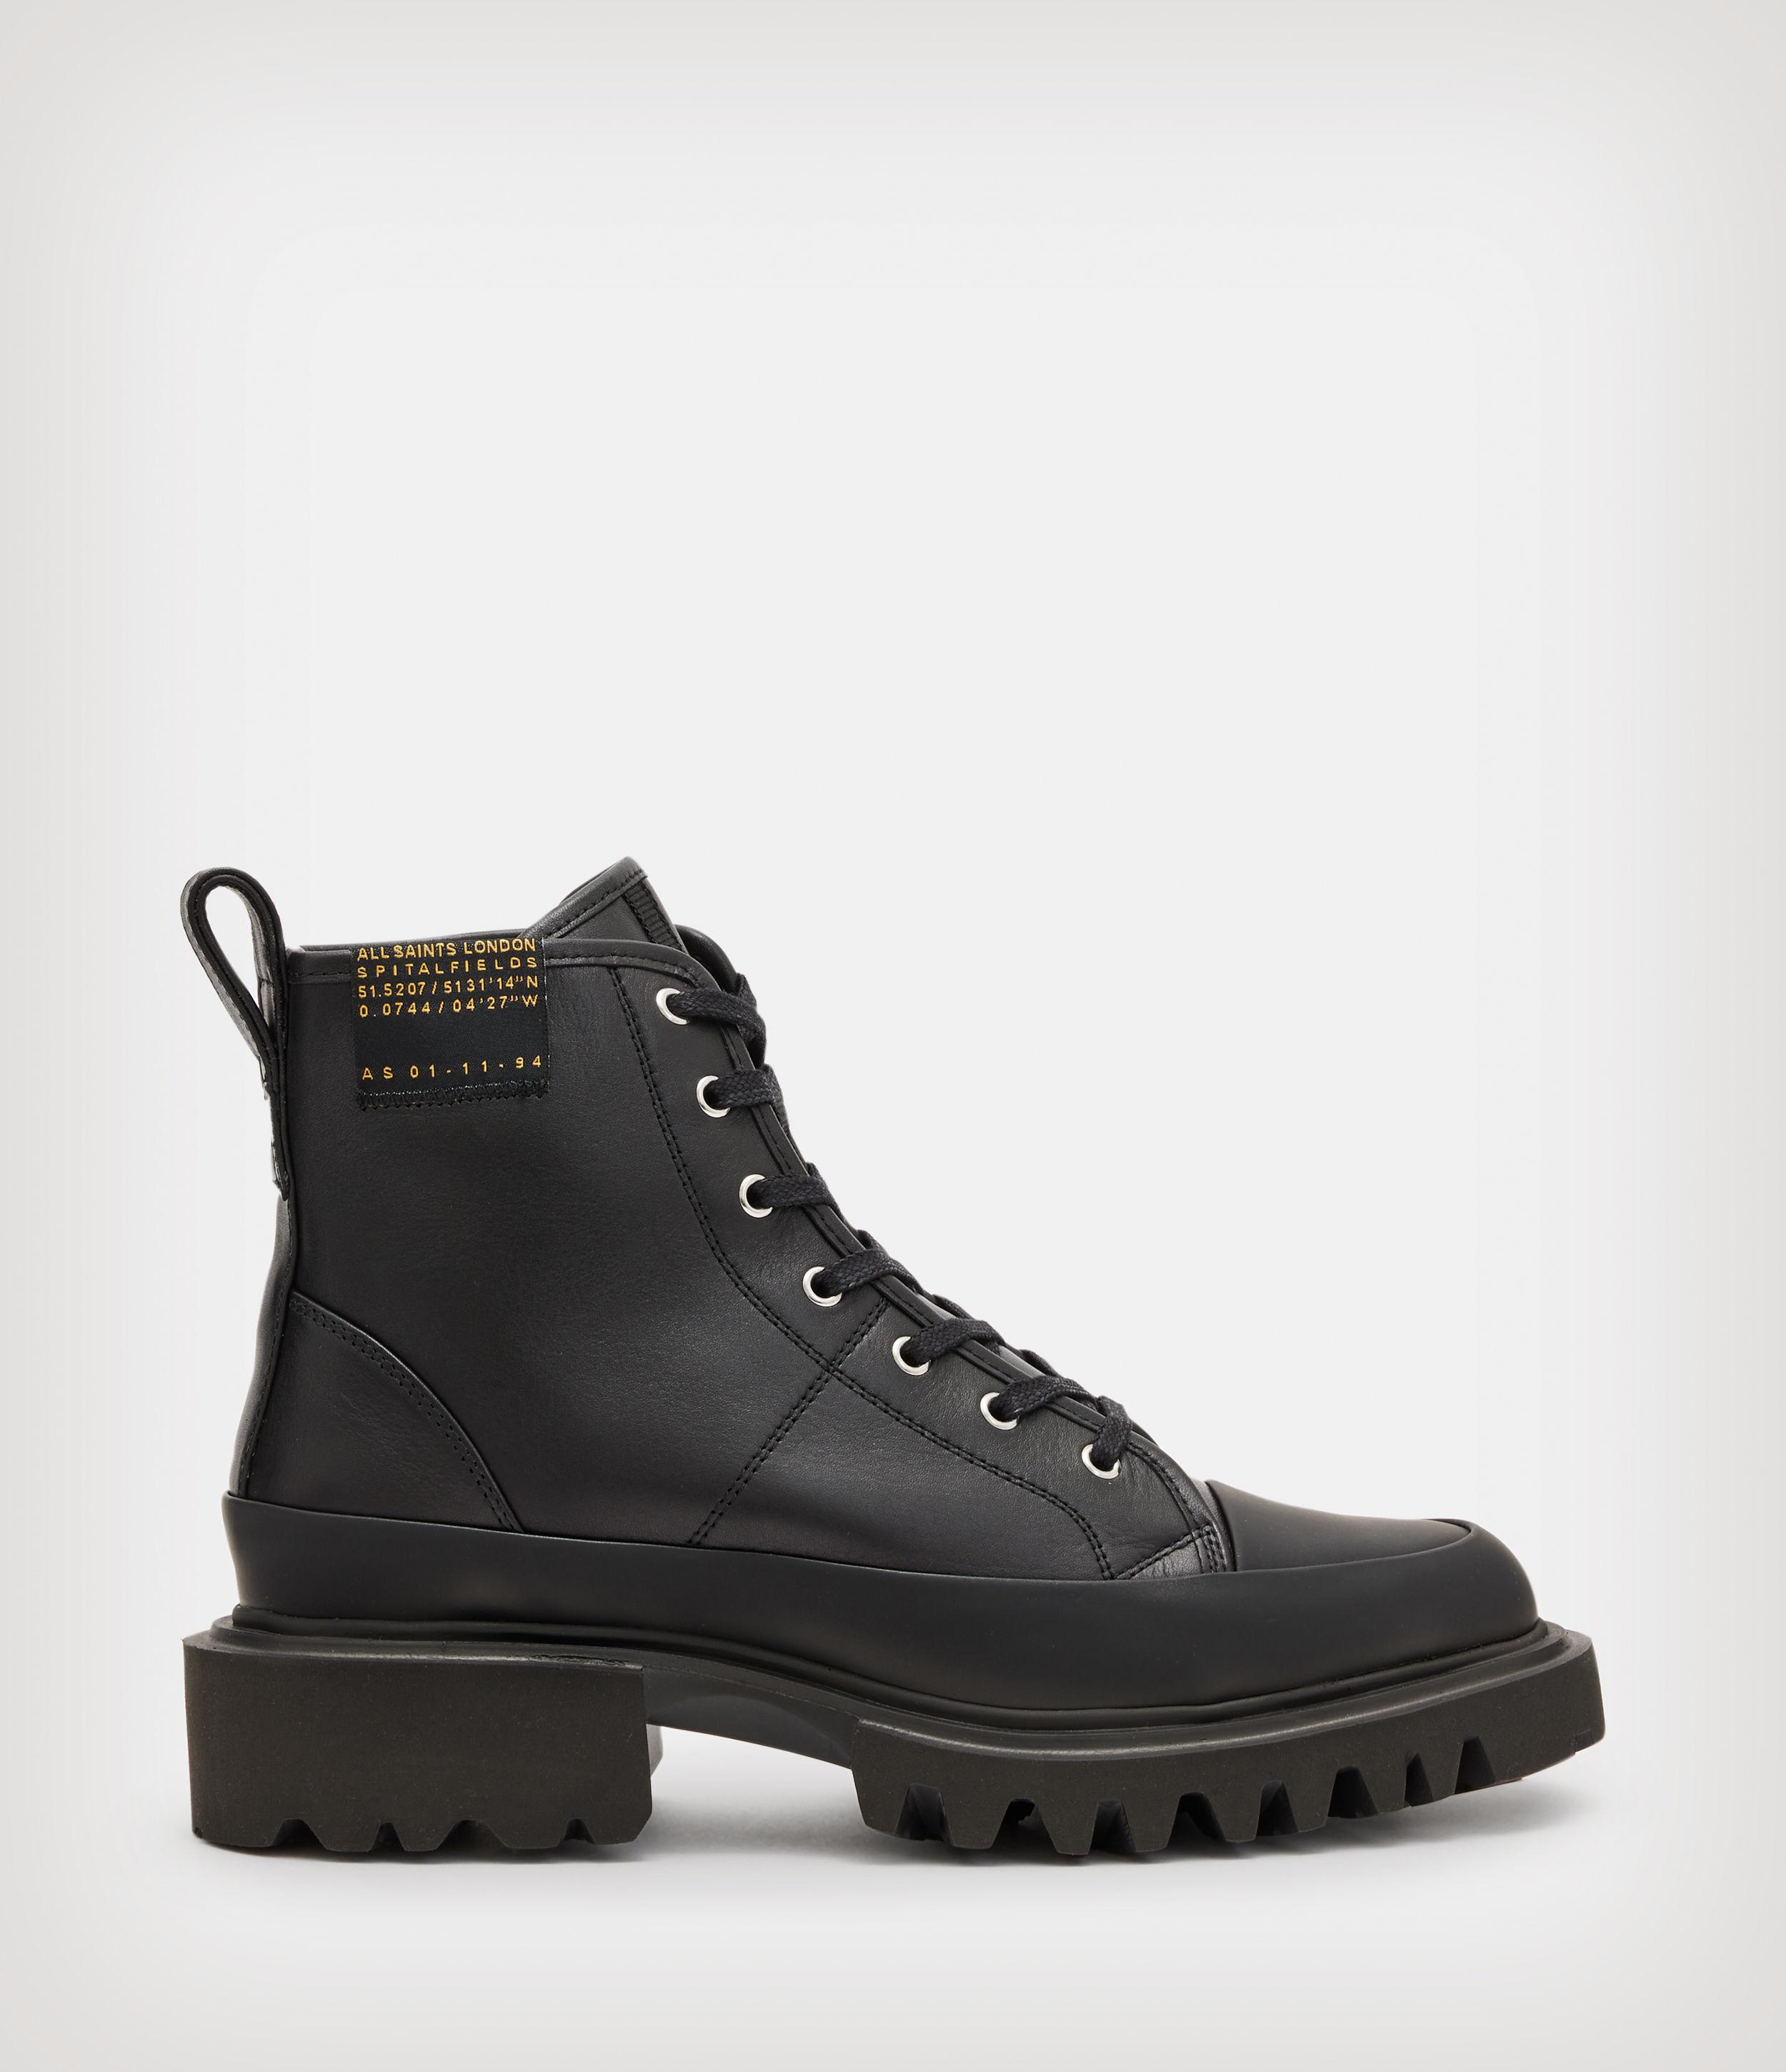 AllSaints Myla Leather Combat Boots in Black | Lyst